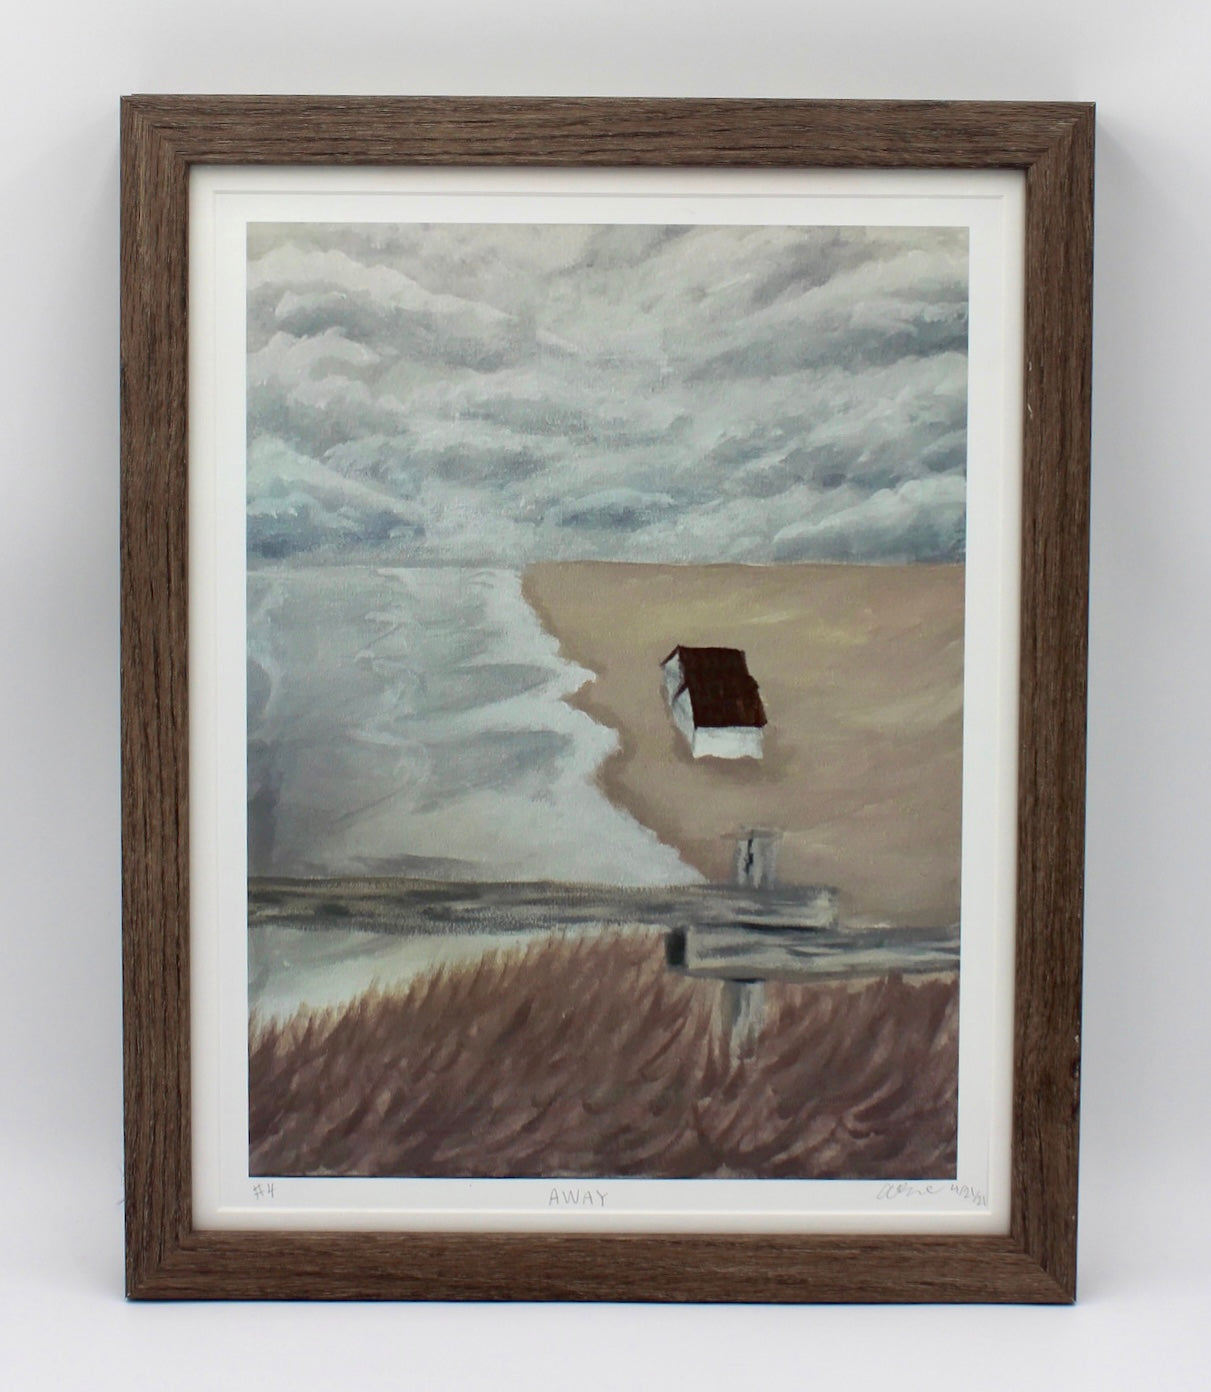 Framed Taupe Painting